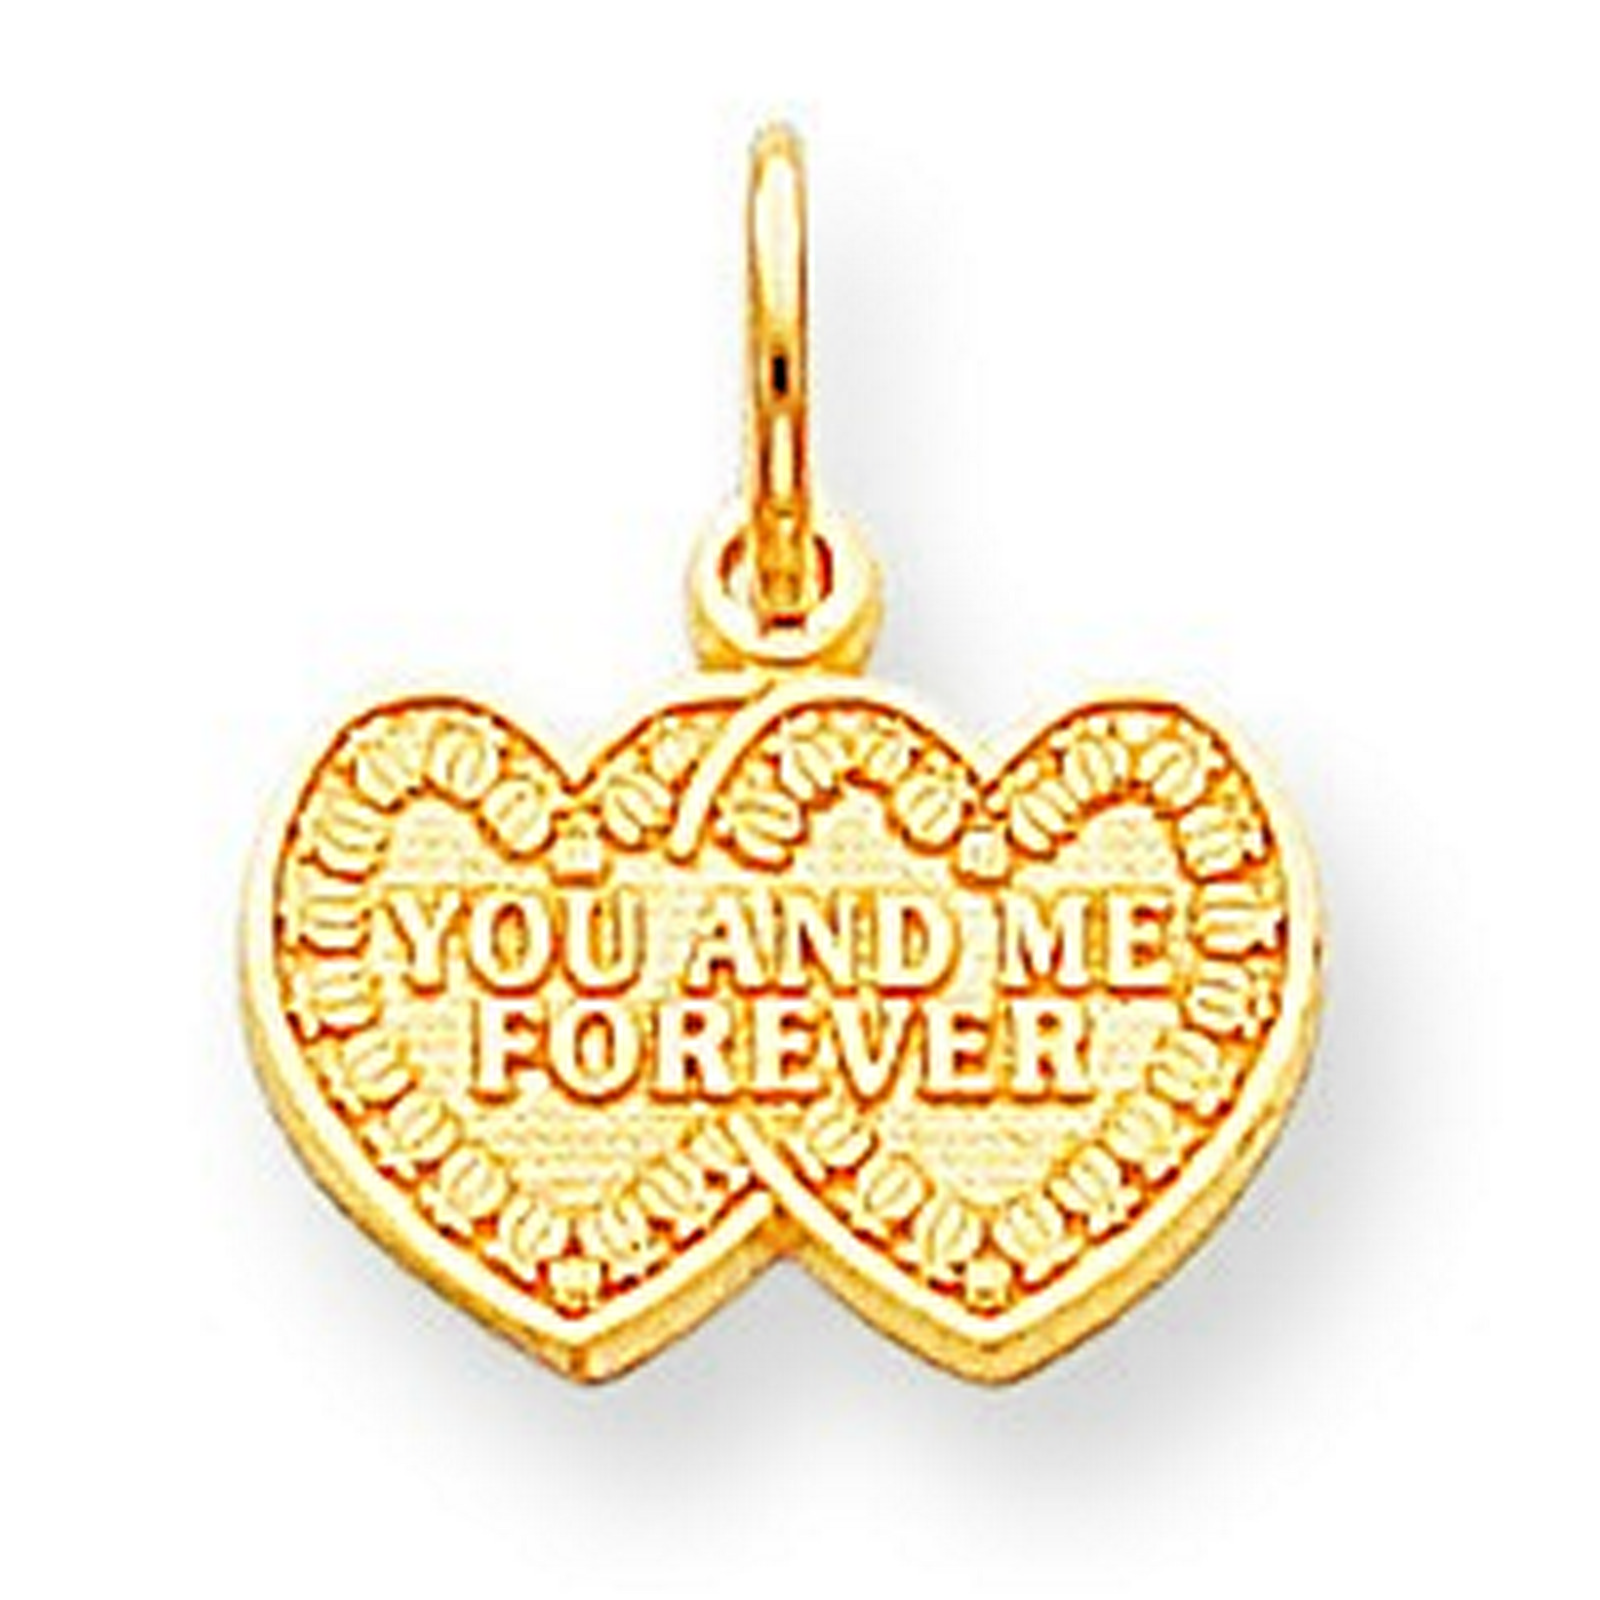 10k Yellow Gold YOU and ME FOREVER HEART Charm (12x15mm)